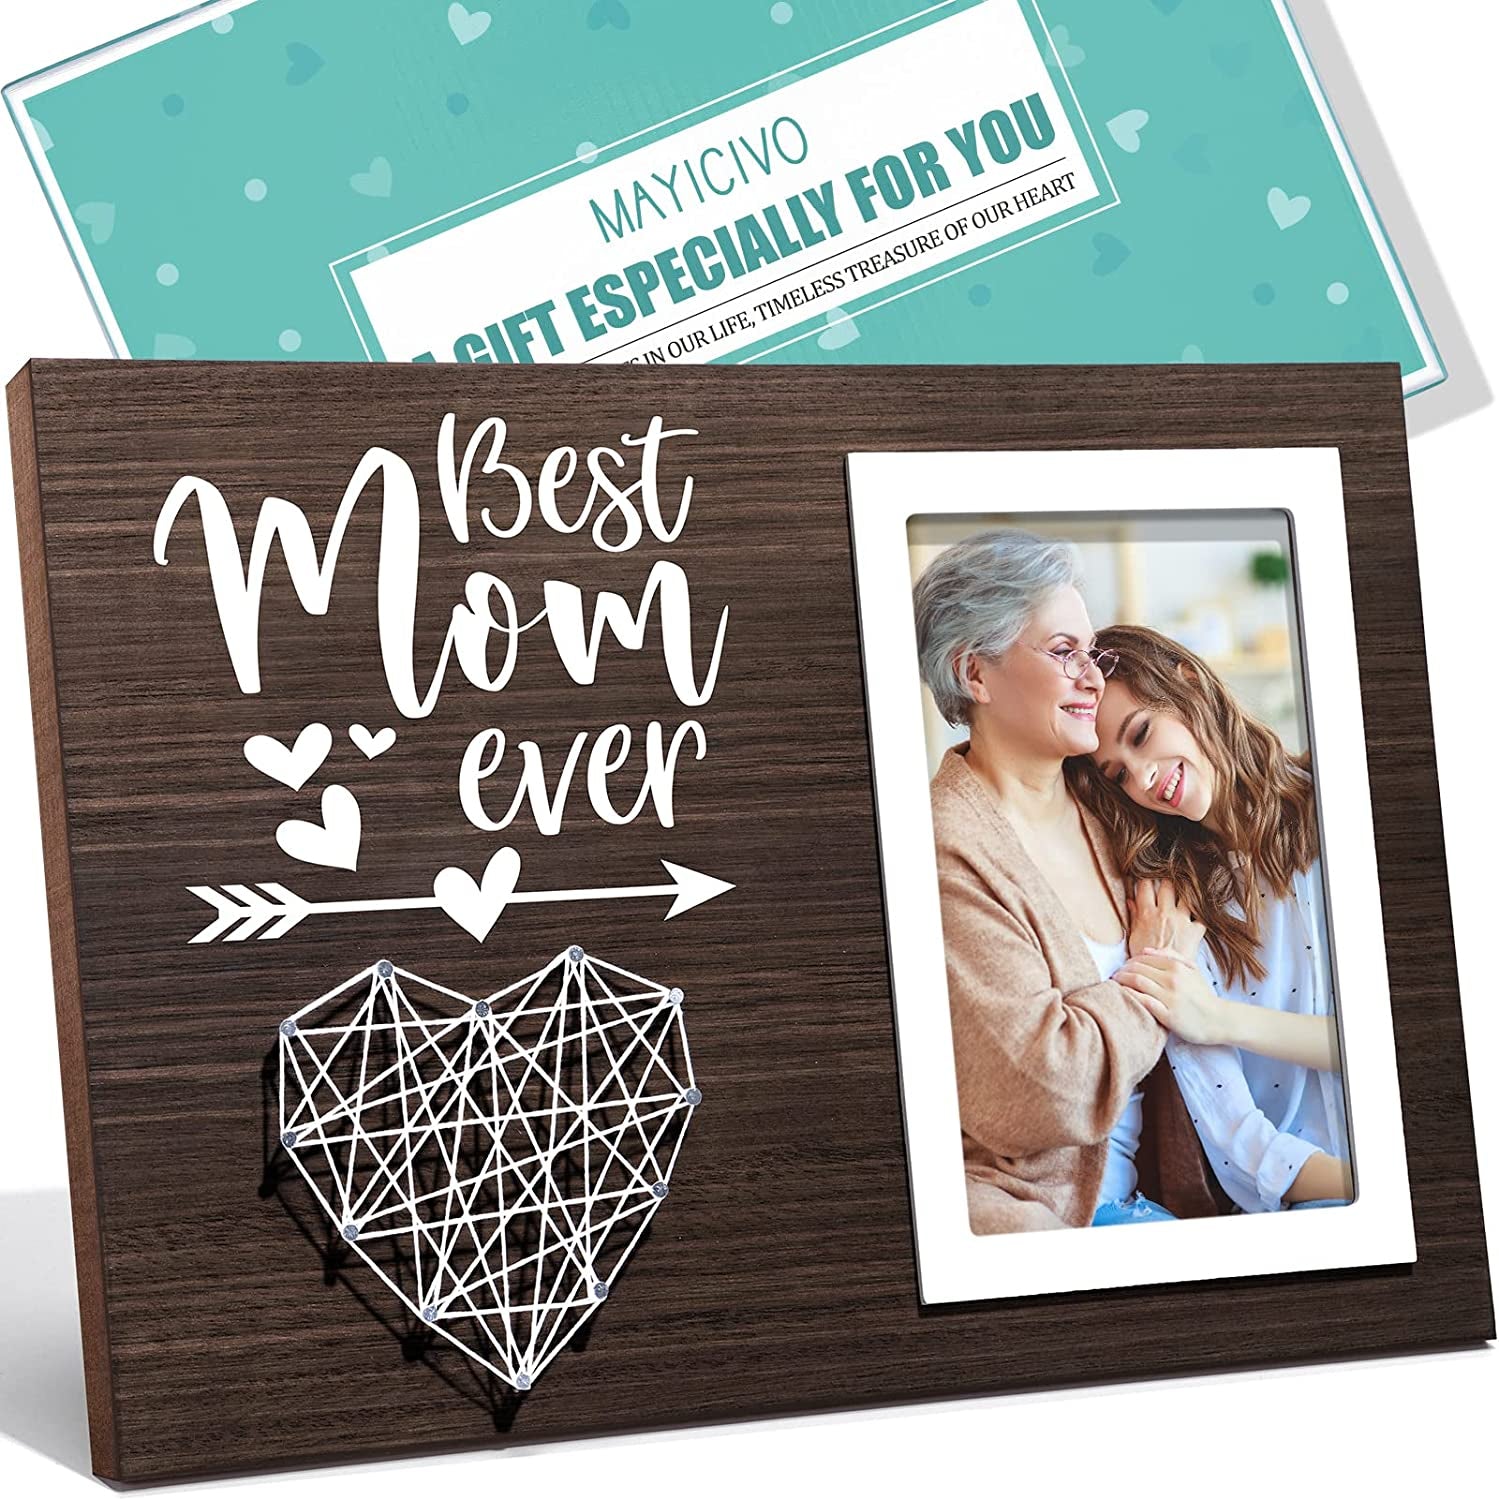 Best Mom Gifts Mothers Day Gifts for Mom from Daughter Son Kids, Mom Picture Frame Mother-In-Law Gifts New Mom Gifts for Women, Birthday Gifts for Mom Mothers Day Gifts for Wife from Husband-4X6 Photo